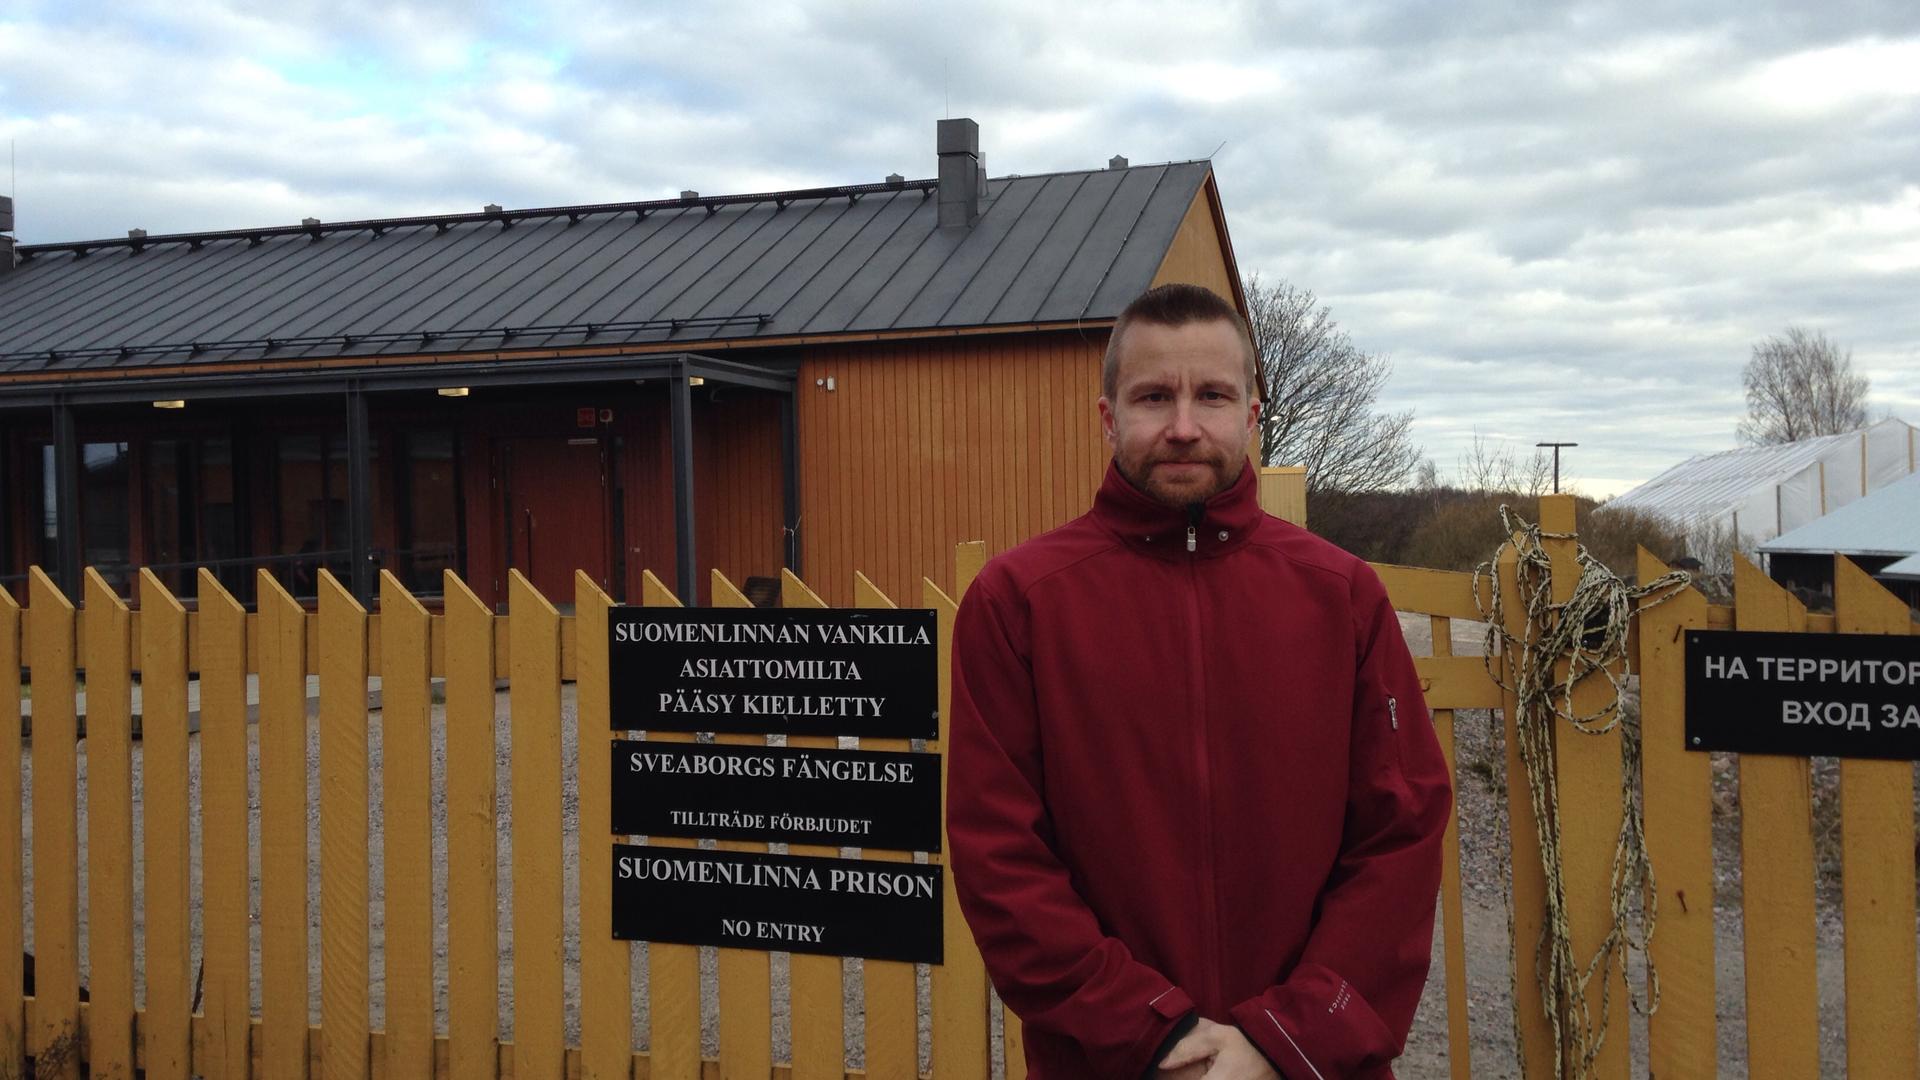 Jukka Tiihonen served the last few years of his sentence for murder at this open prison on Suomenlinna Island. The yellow fence, with a sign saying, "Labor Colony" in Finnish, Swedish, English, and Russian, separates the prison from a neighborhood.